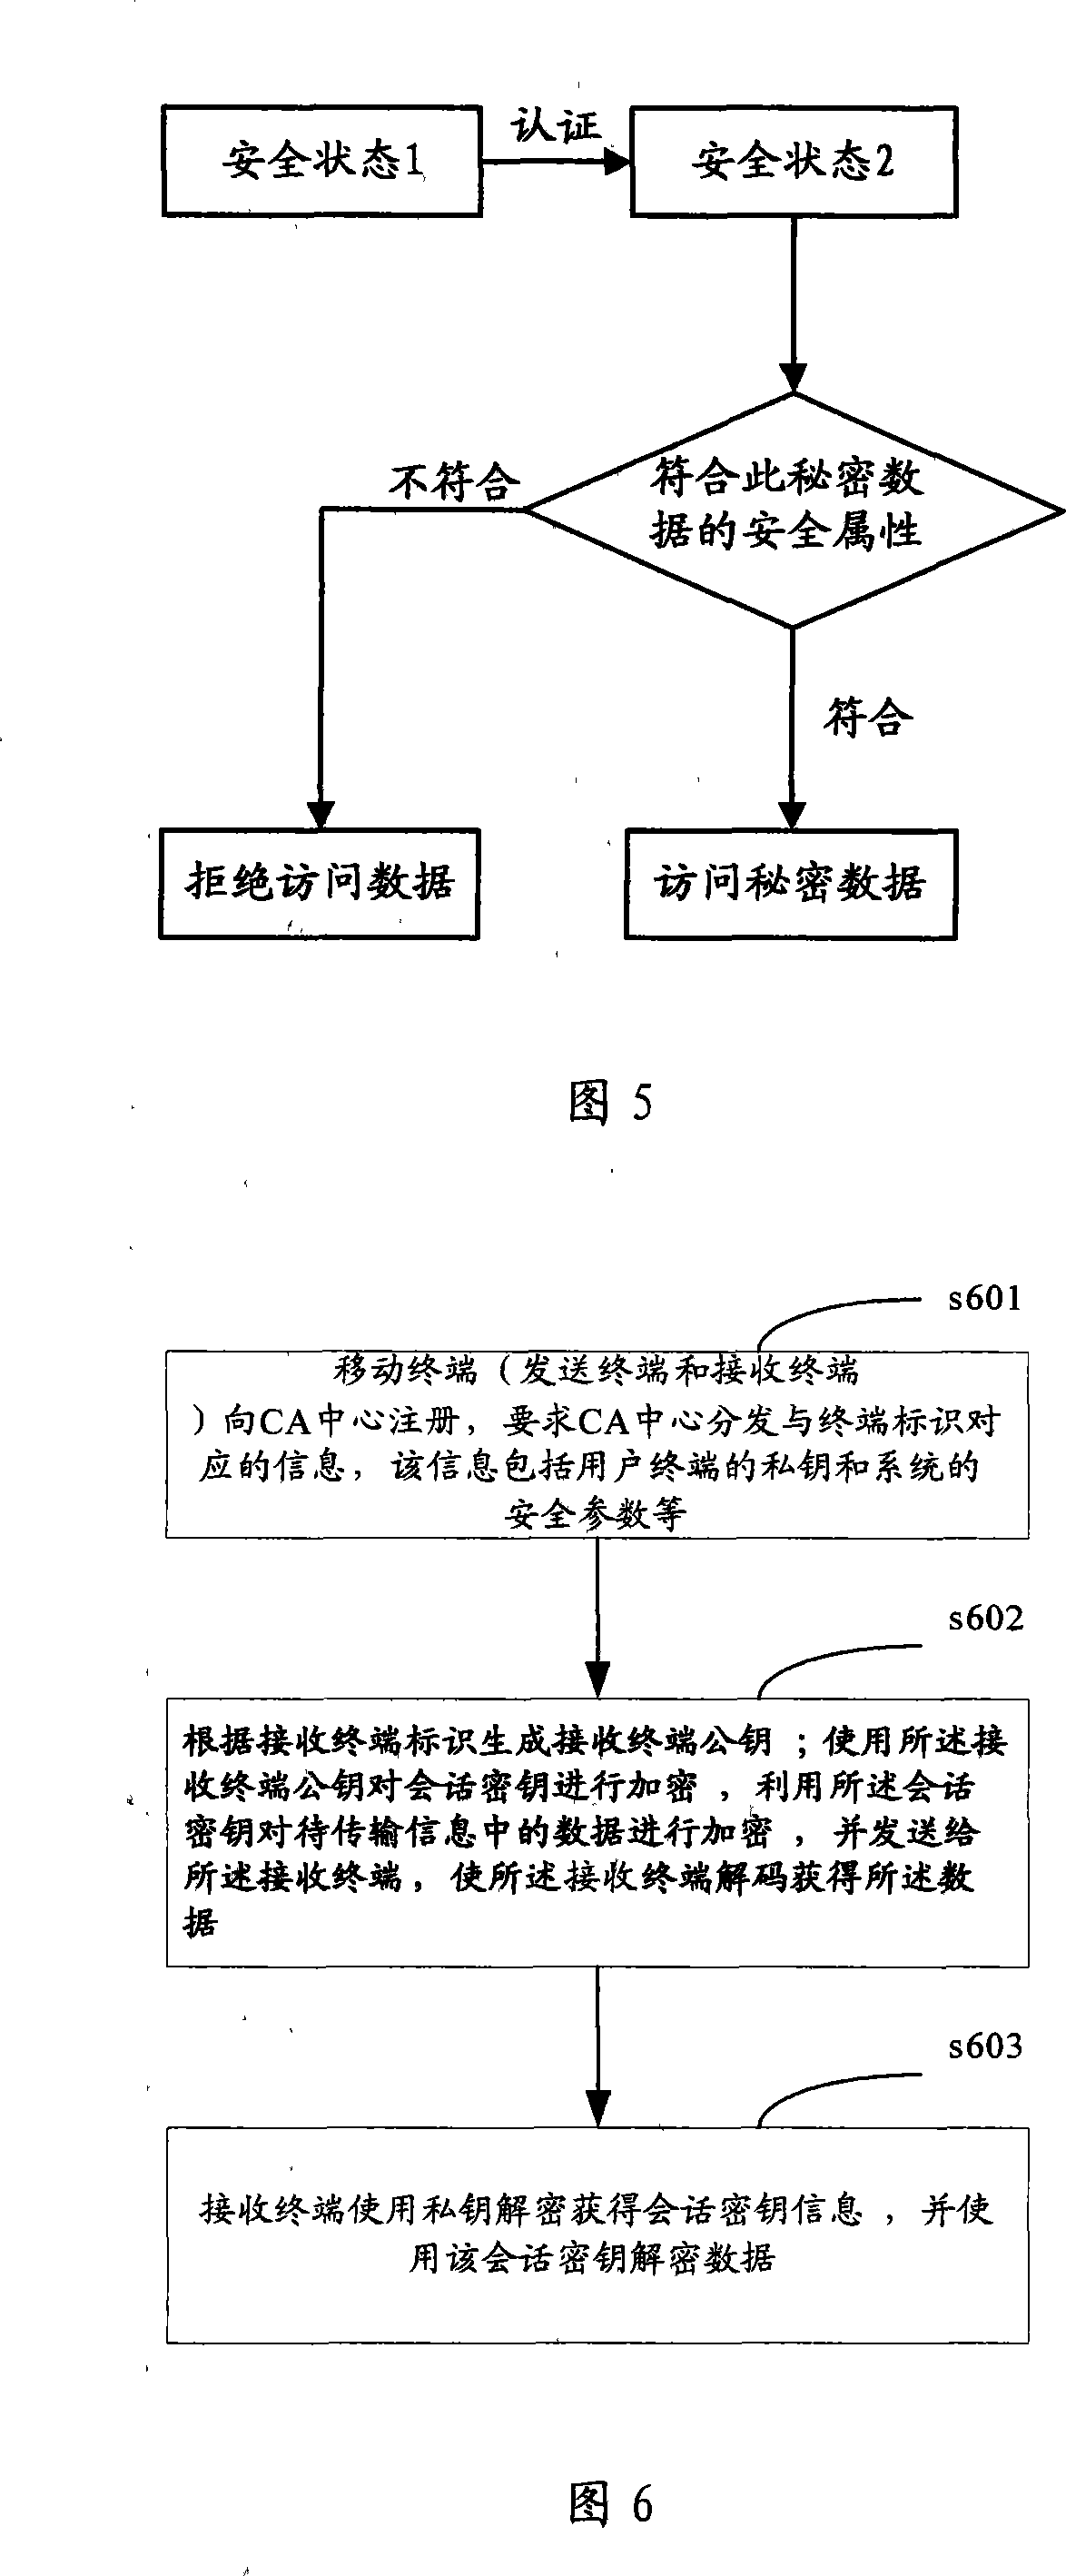 Wireless network security transmission method, system and equipment